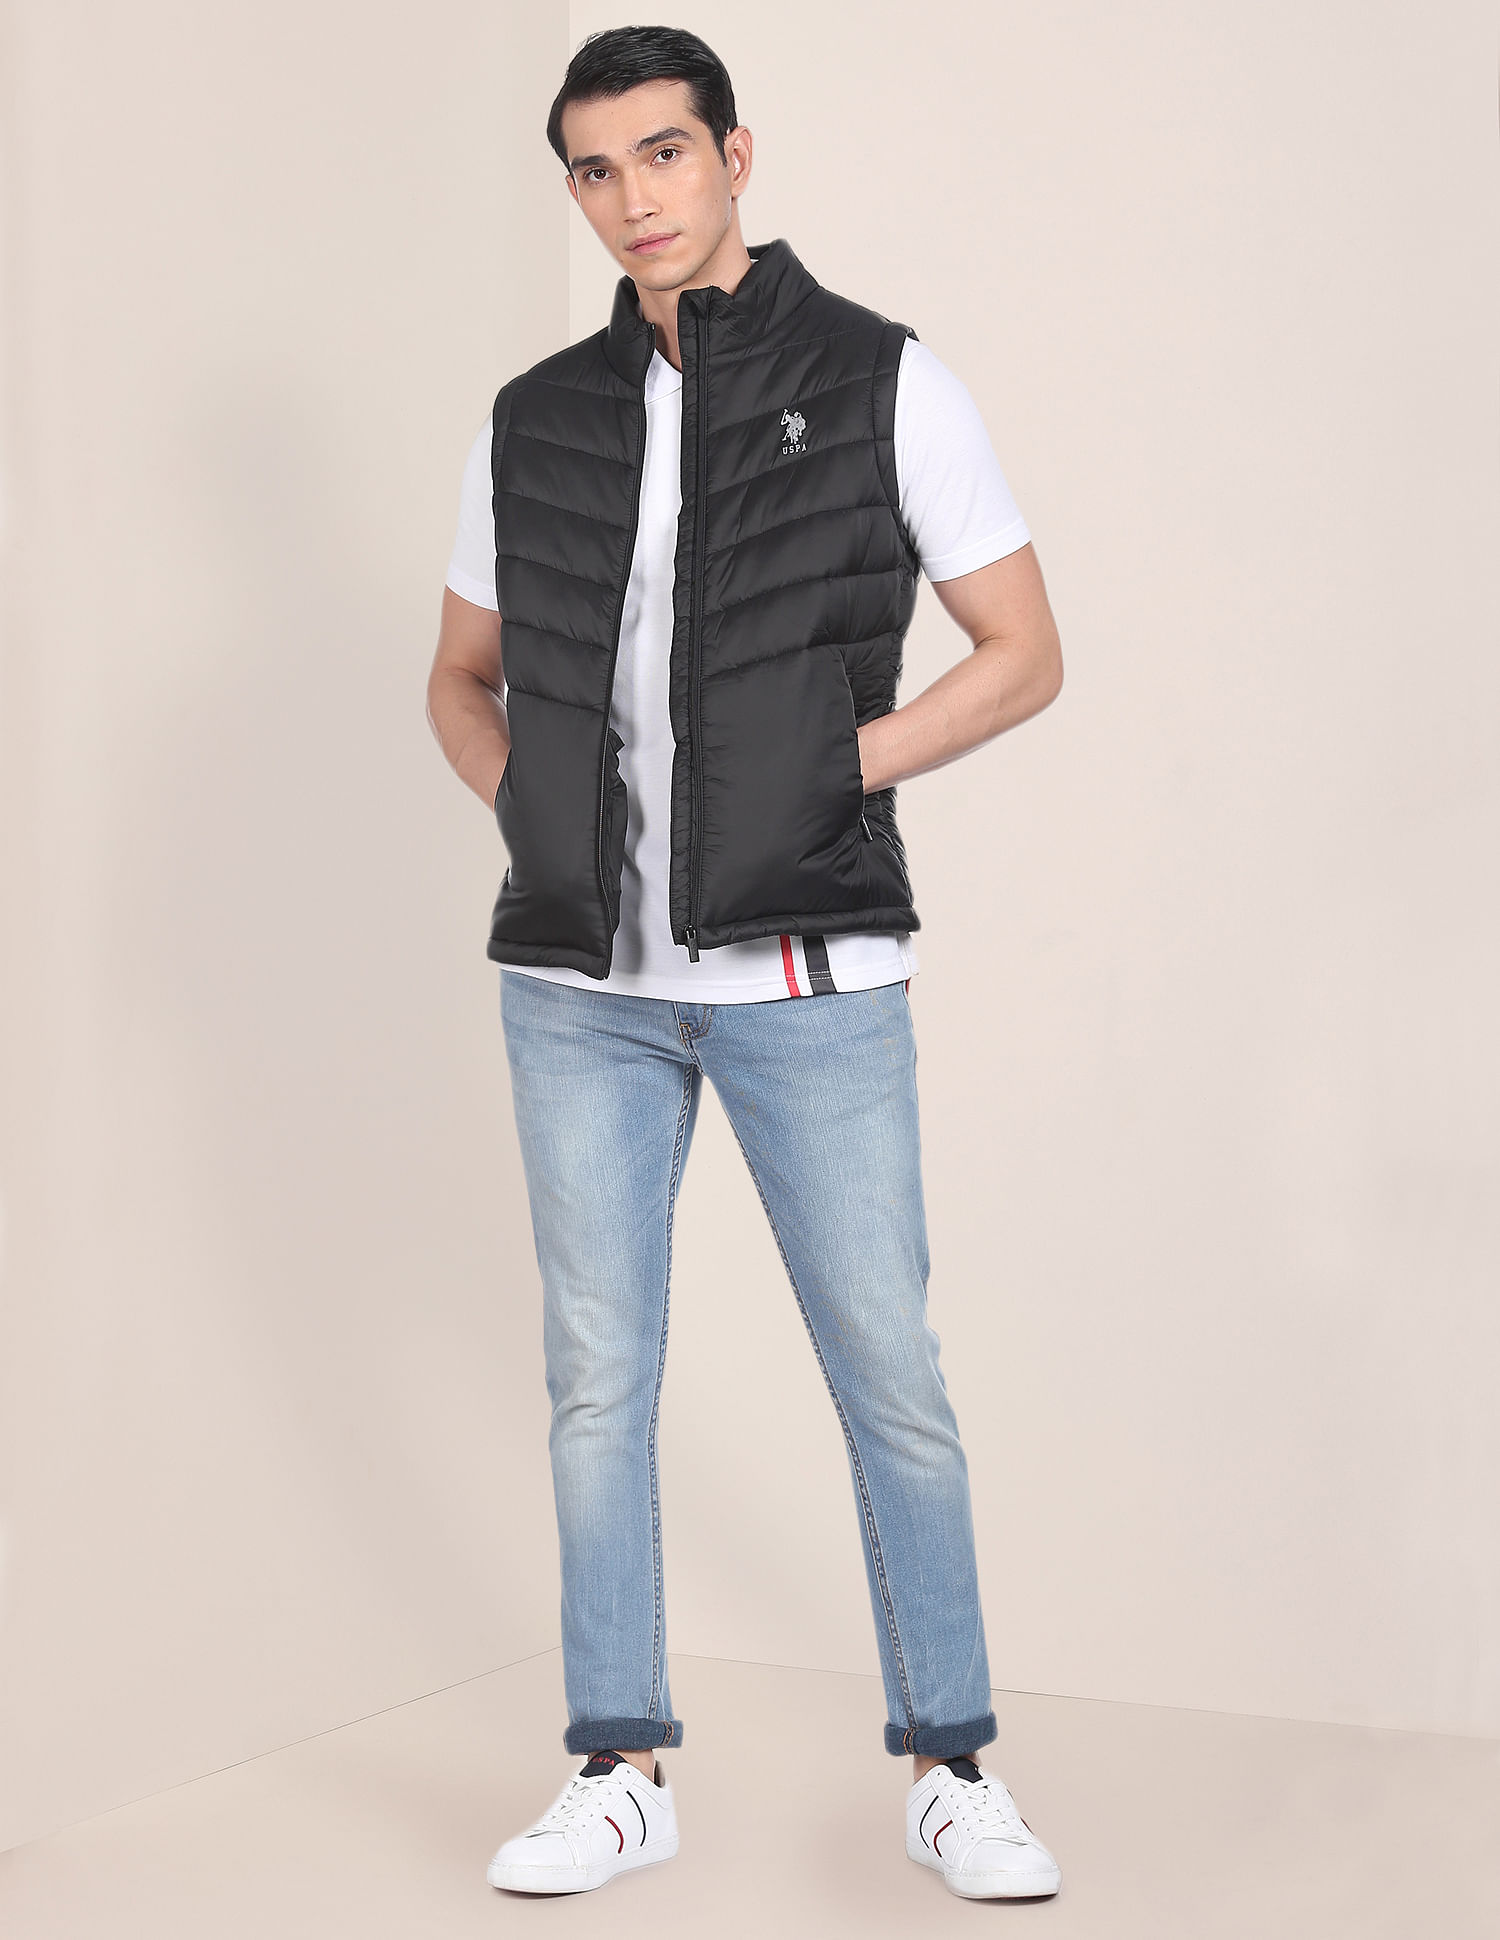 Buy U.S. Polo Assn. High Neck Sleeveless Quilted Jacket - NNNOW.com